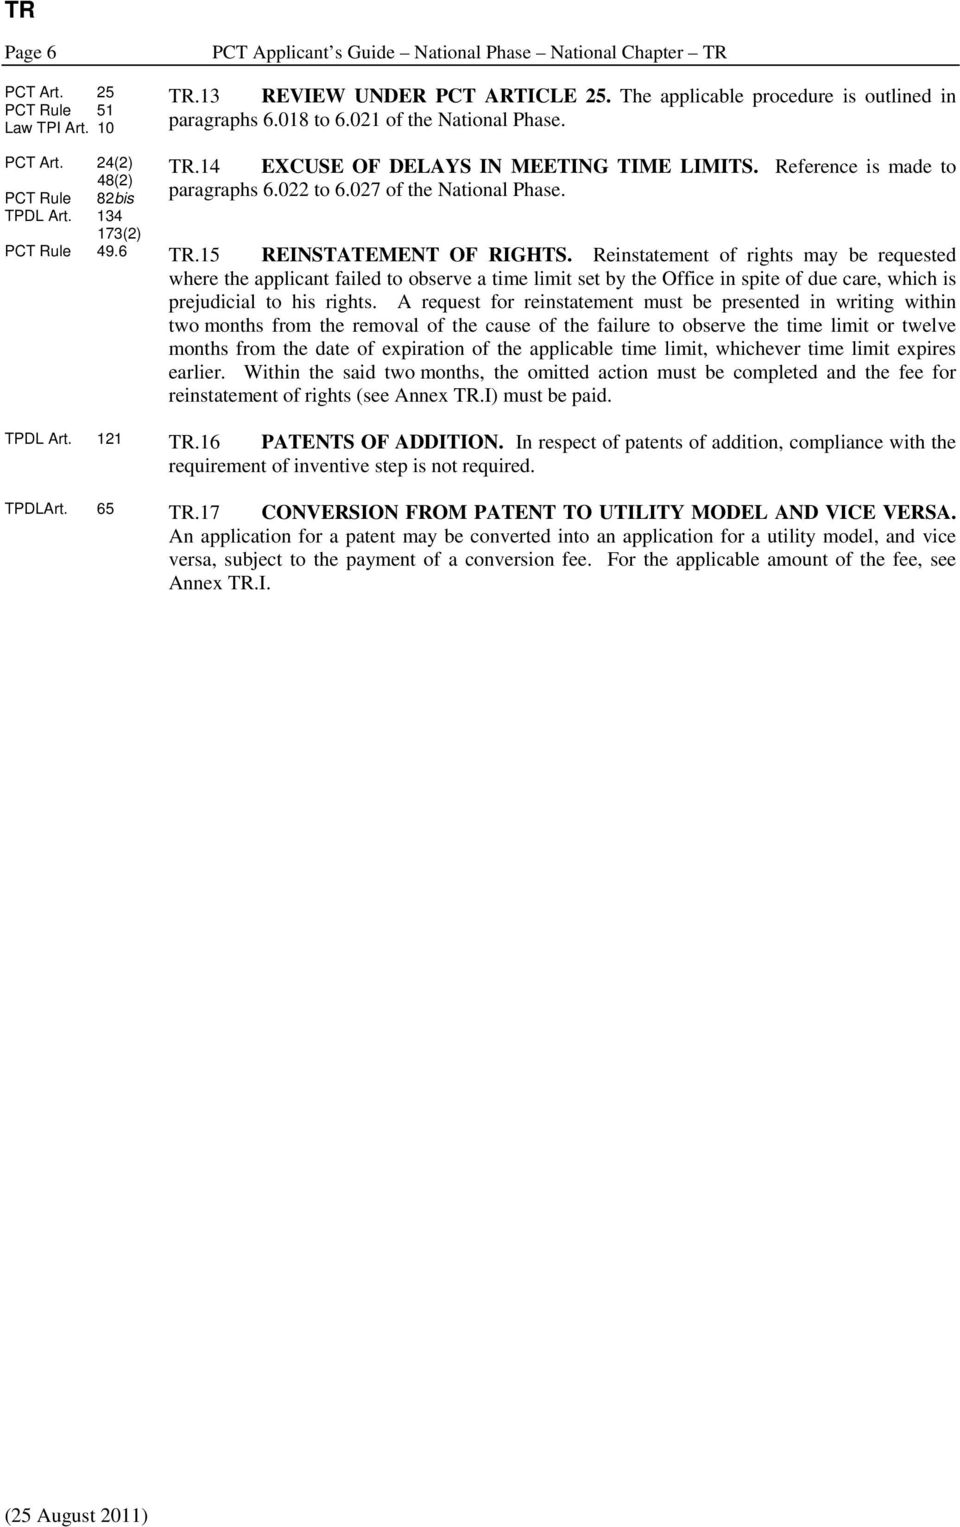 PCT Rule 49.6.15 REINSTATEMENT OF RIGHTS.